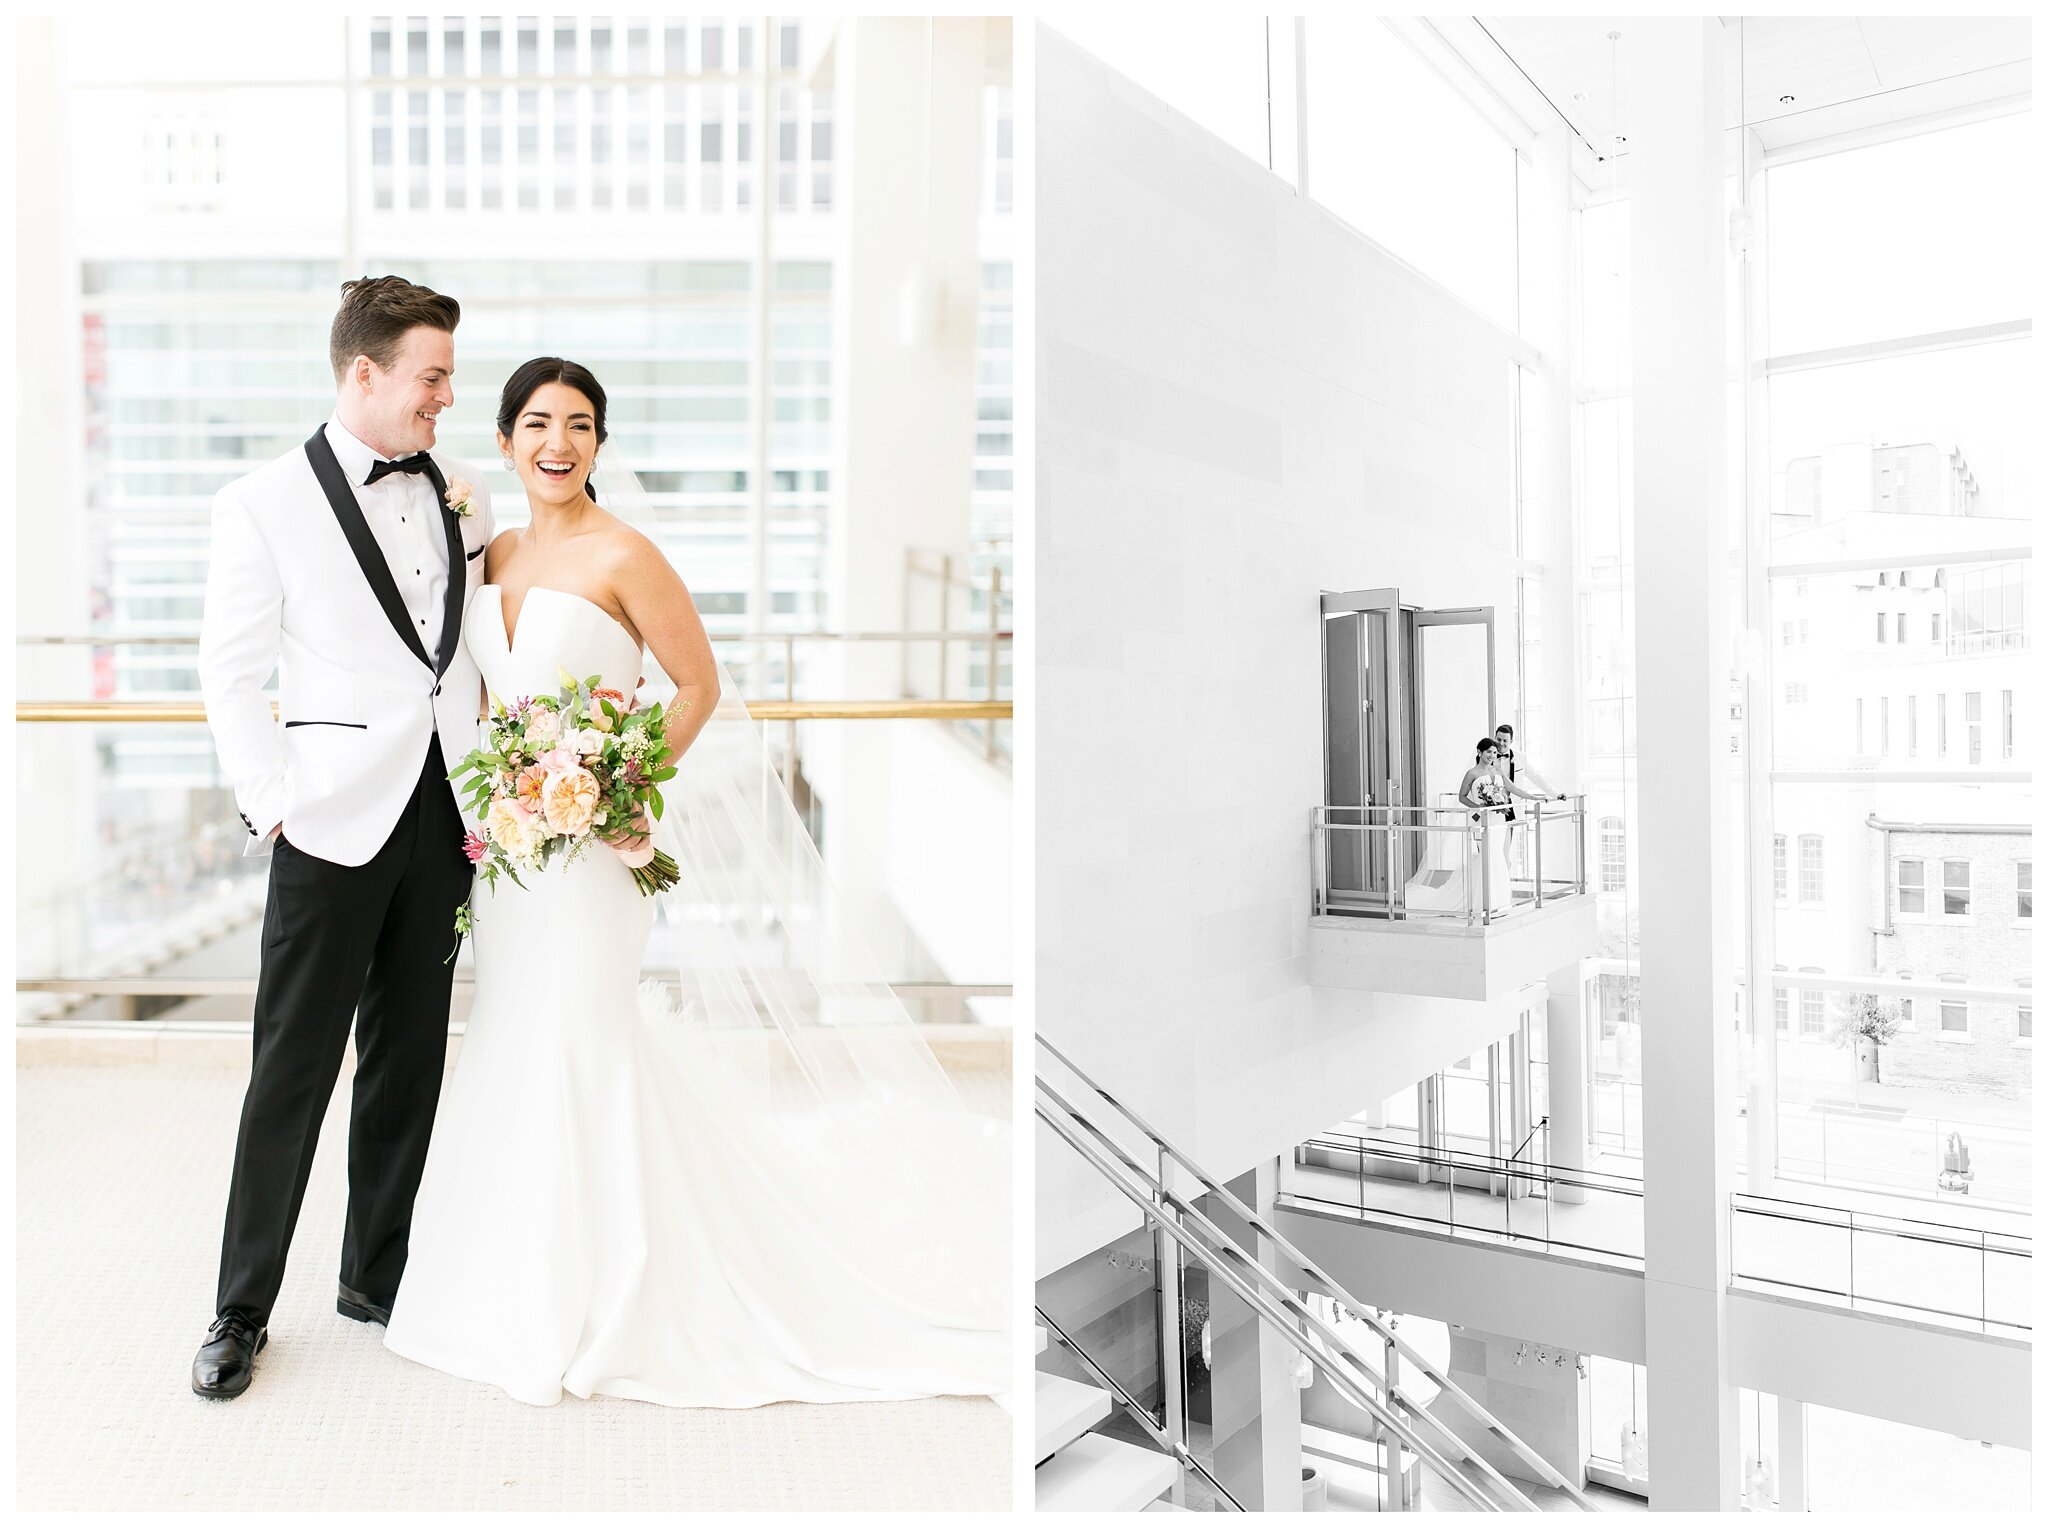 Wedding from 2018 that I photographed at The Overture. The image on the left is where our Ceremony will take place! EEP!